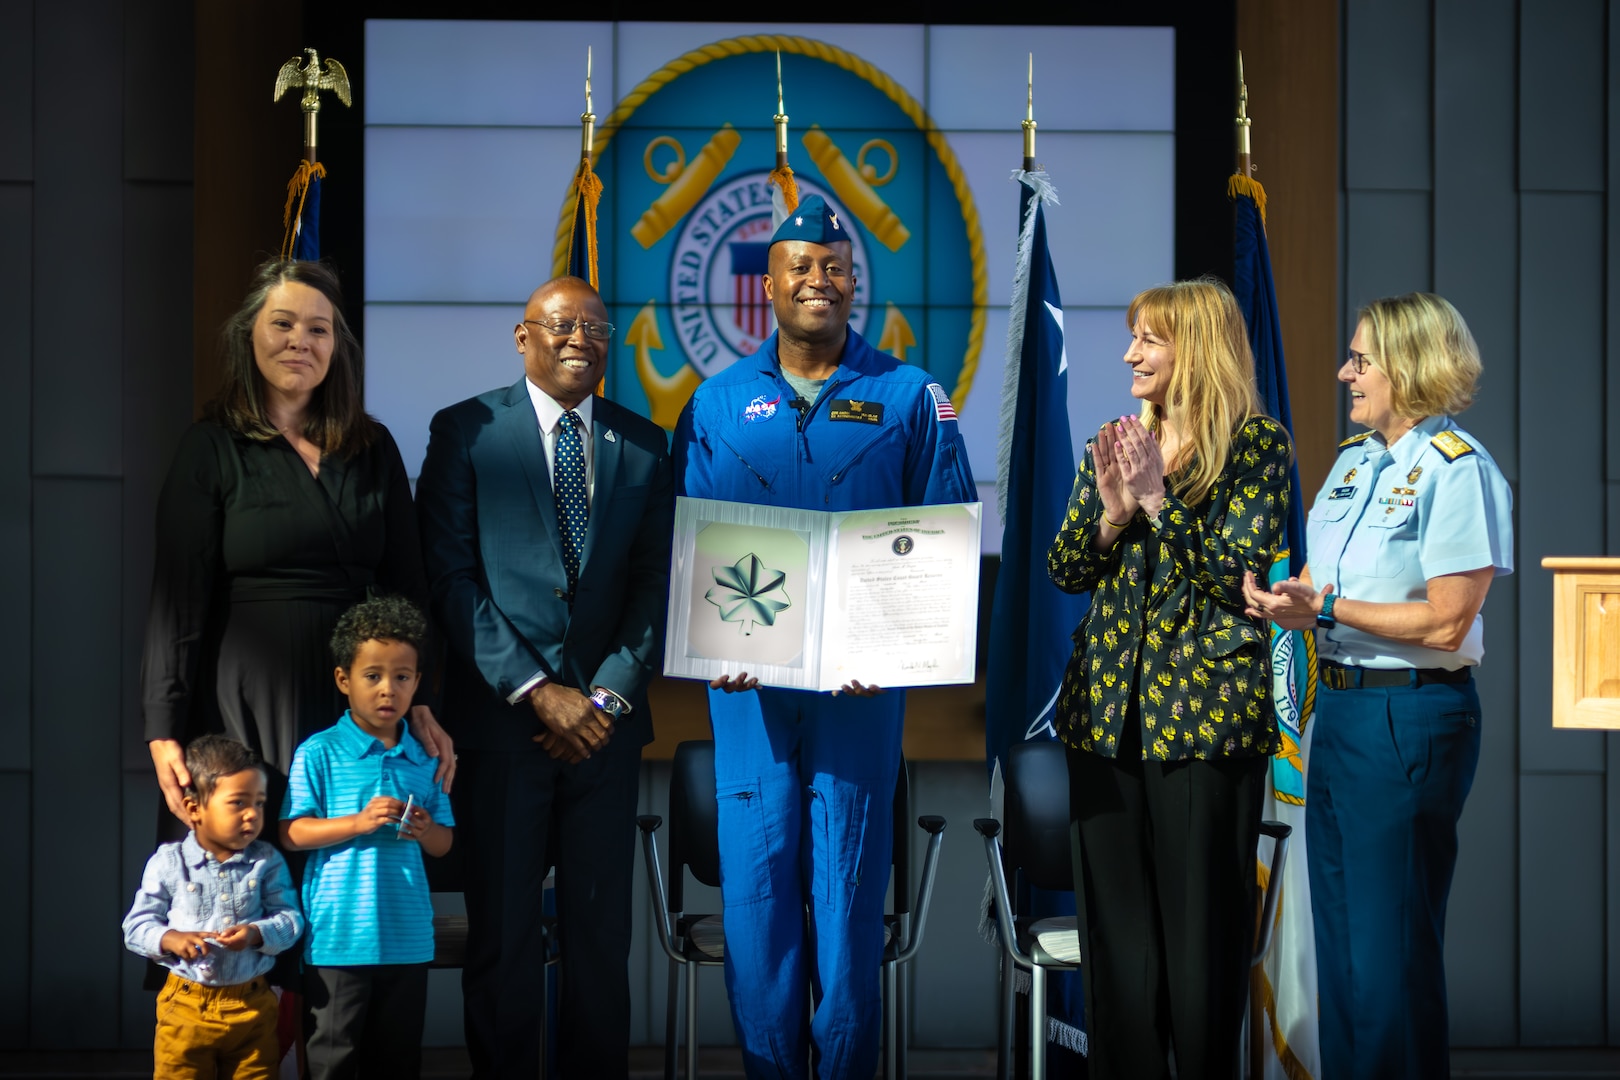 Cmdr. Andre Douglas, a NASA Astronaut, swears in to the Coast Guard Reserve during a commissioning ceremony presided over by Adm. Linda L. Fagan, commandant of the Coast Guard, at Coast Guard Headquarters in Washington, D.C., March 19, 2024. Douglas, a Coast Guard Academy Class of 2008 graduate, reported to NASA in January 2022, and completed astronaut training March 5, 2024.